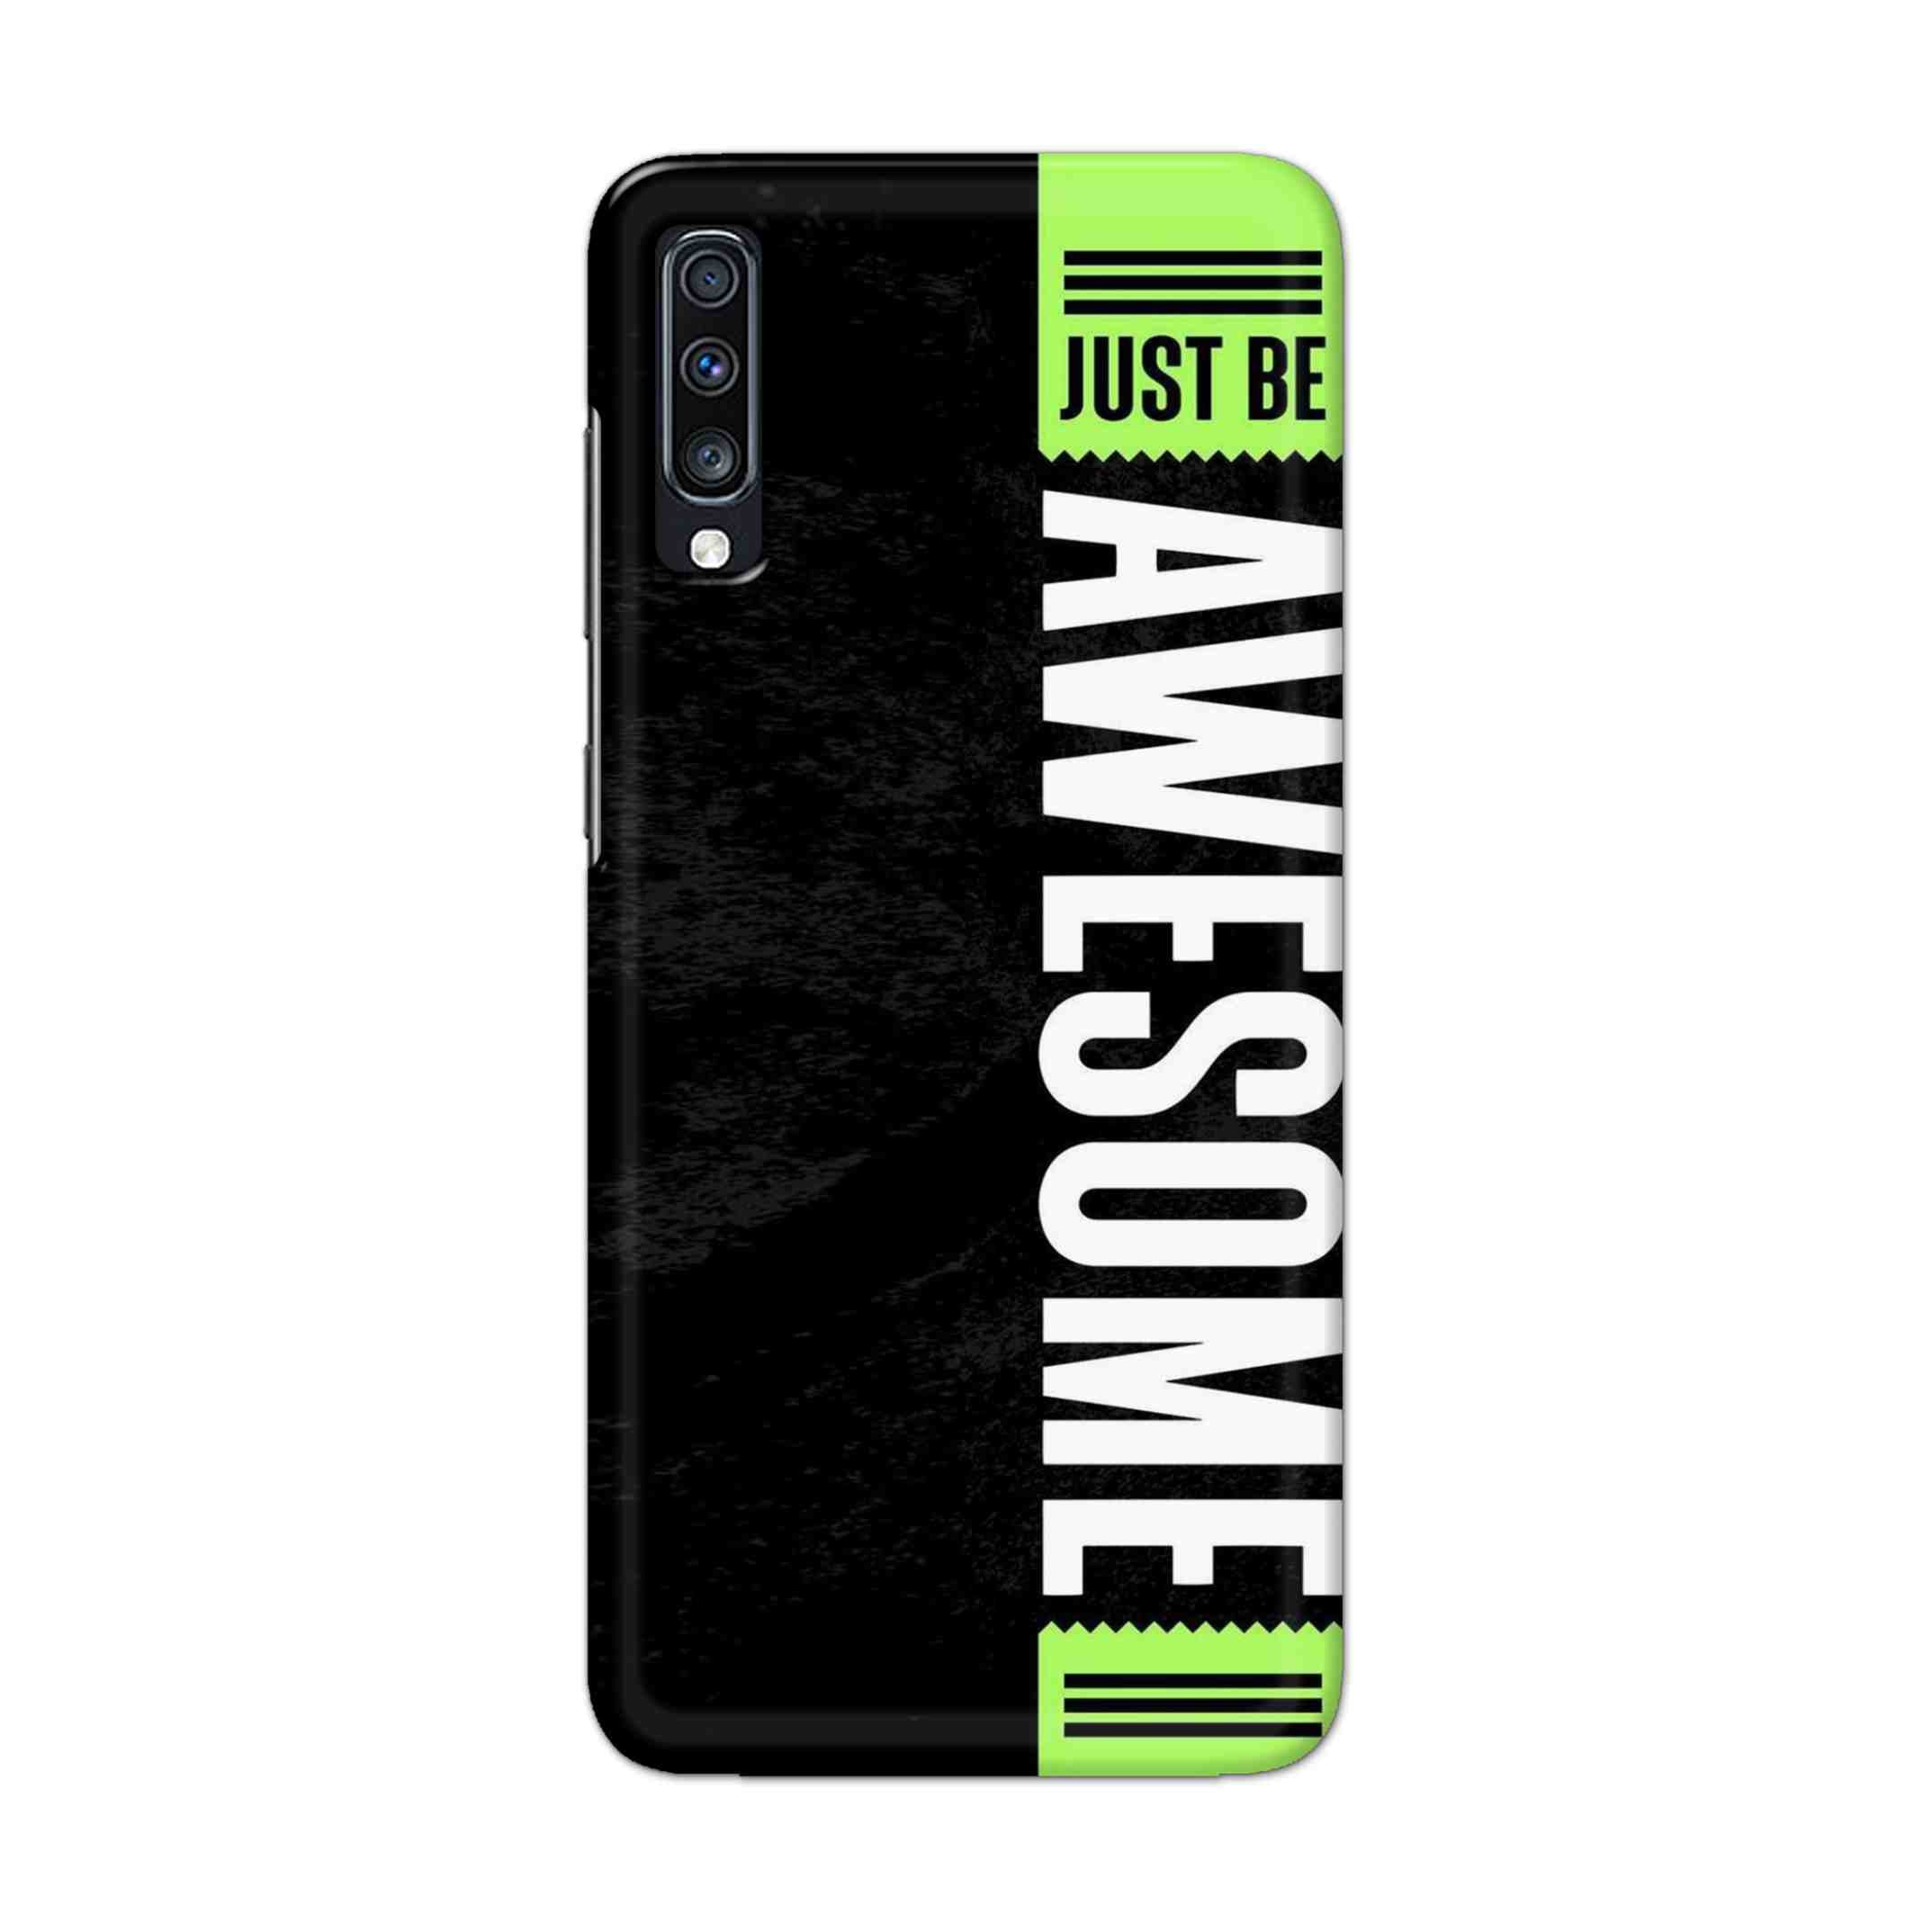 Buy Awesome Street Hard Back Mobile Phone Case Cover For Samsung Galaxy A70 Online